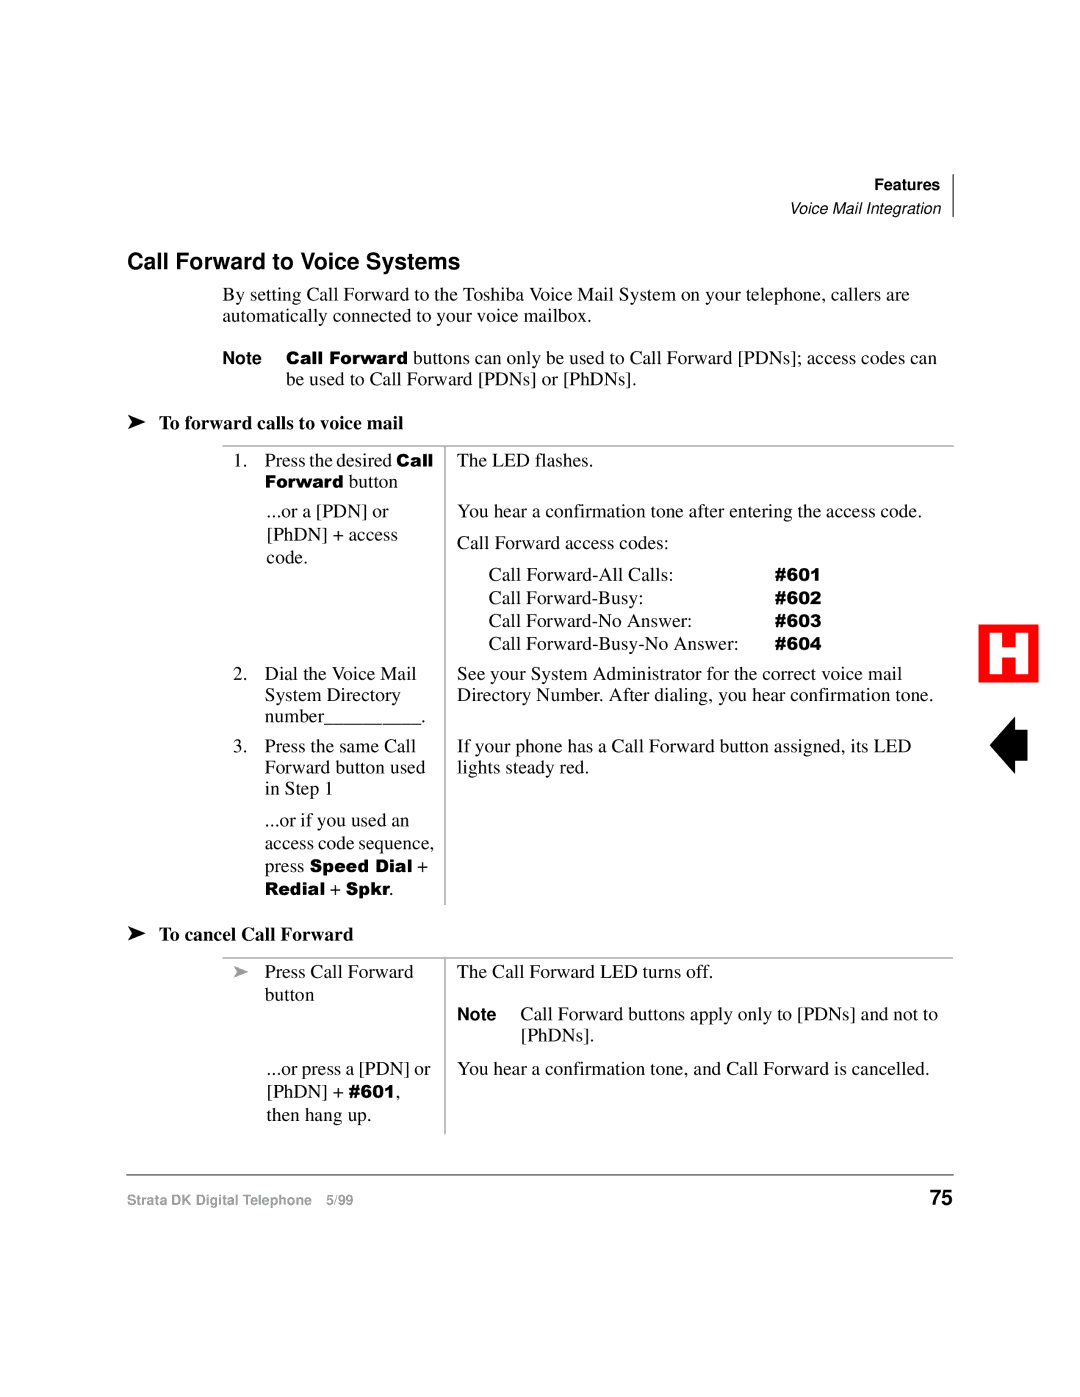 Toshiba Digital Telephone manual Call Forward to Voice Systems, To forward calls to voice mail, To cancel Call Forward 